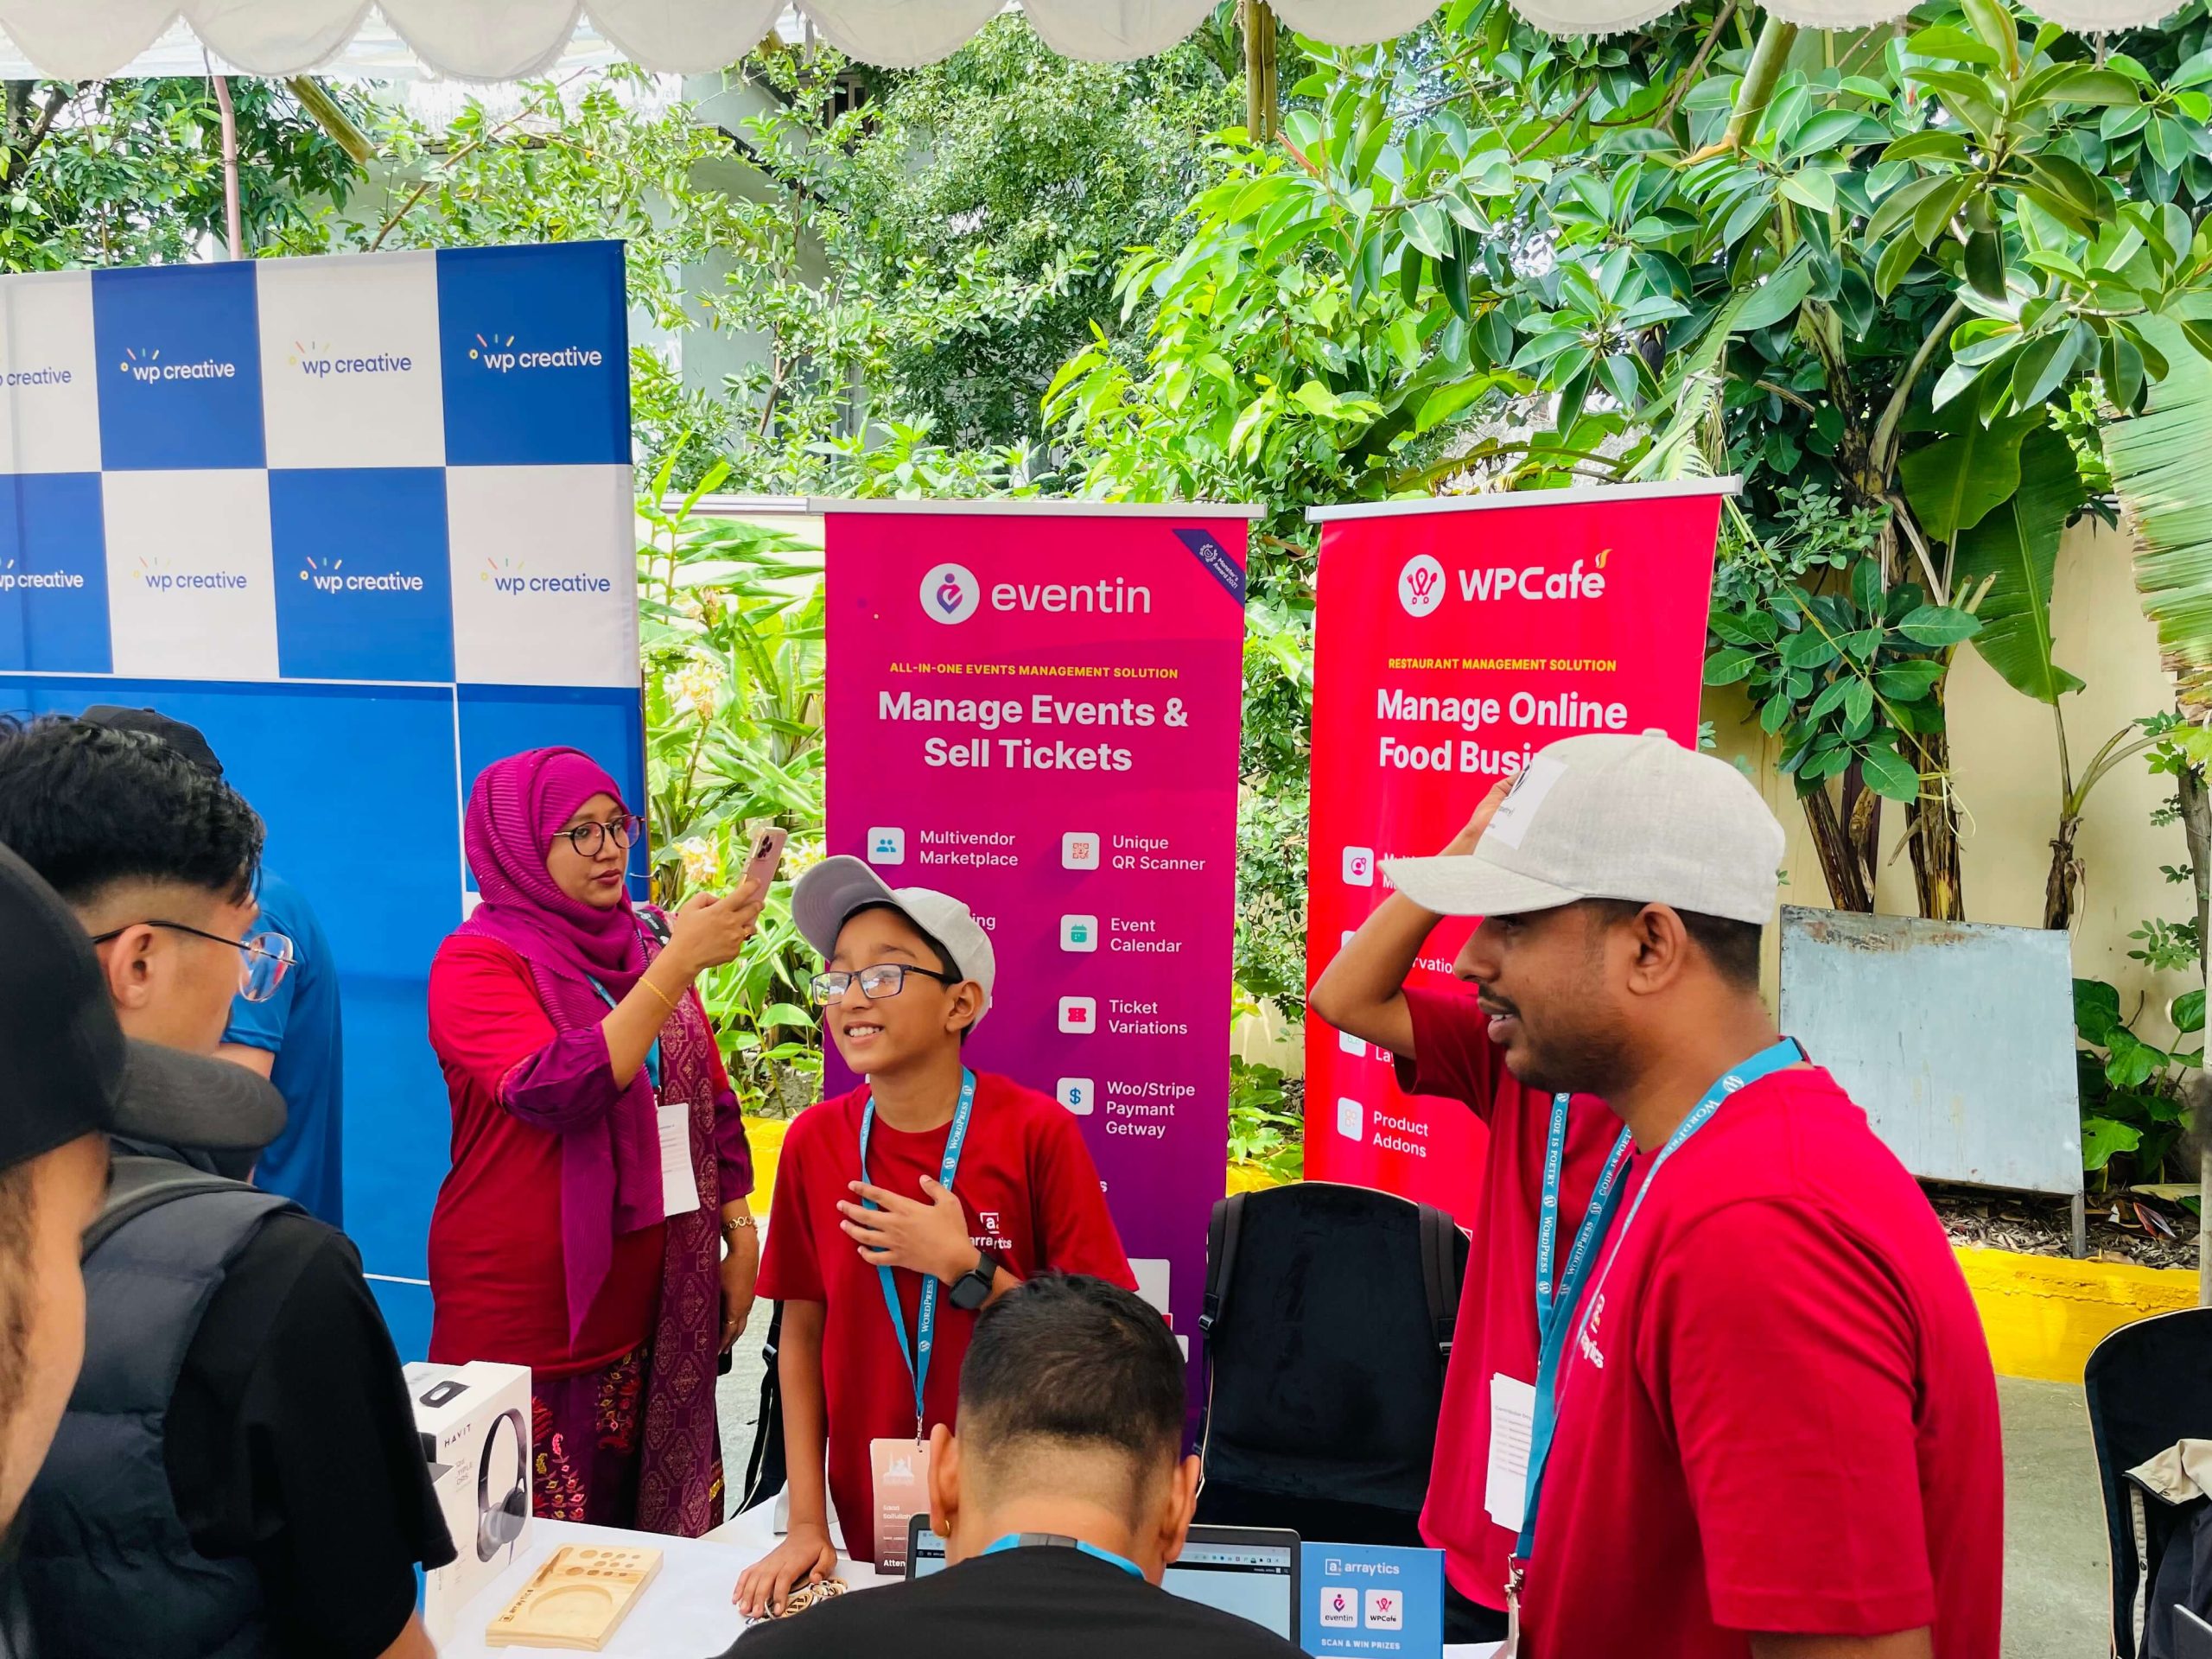 An image of WordPress users at WordCamp Booth